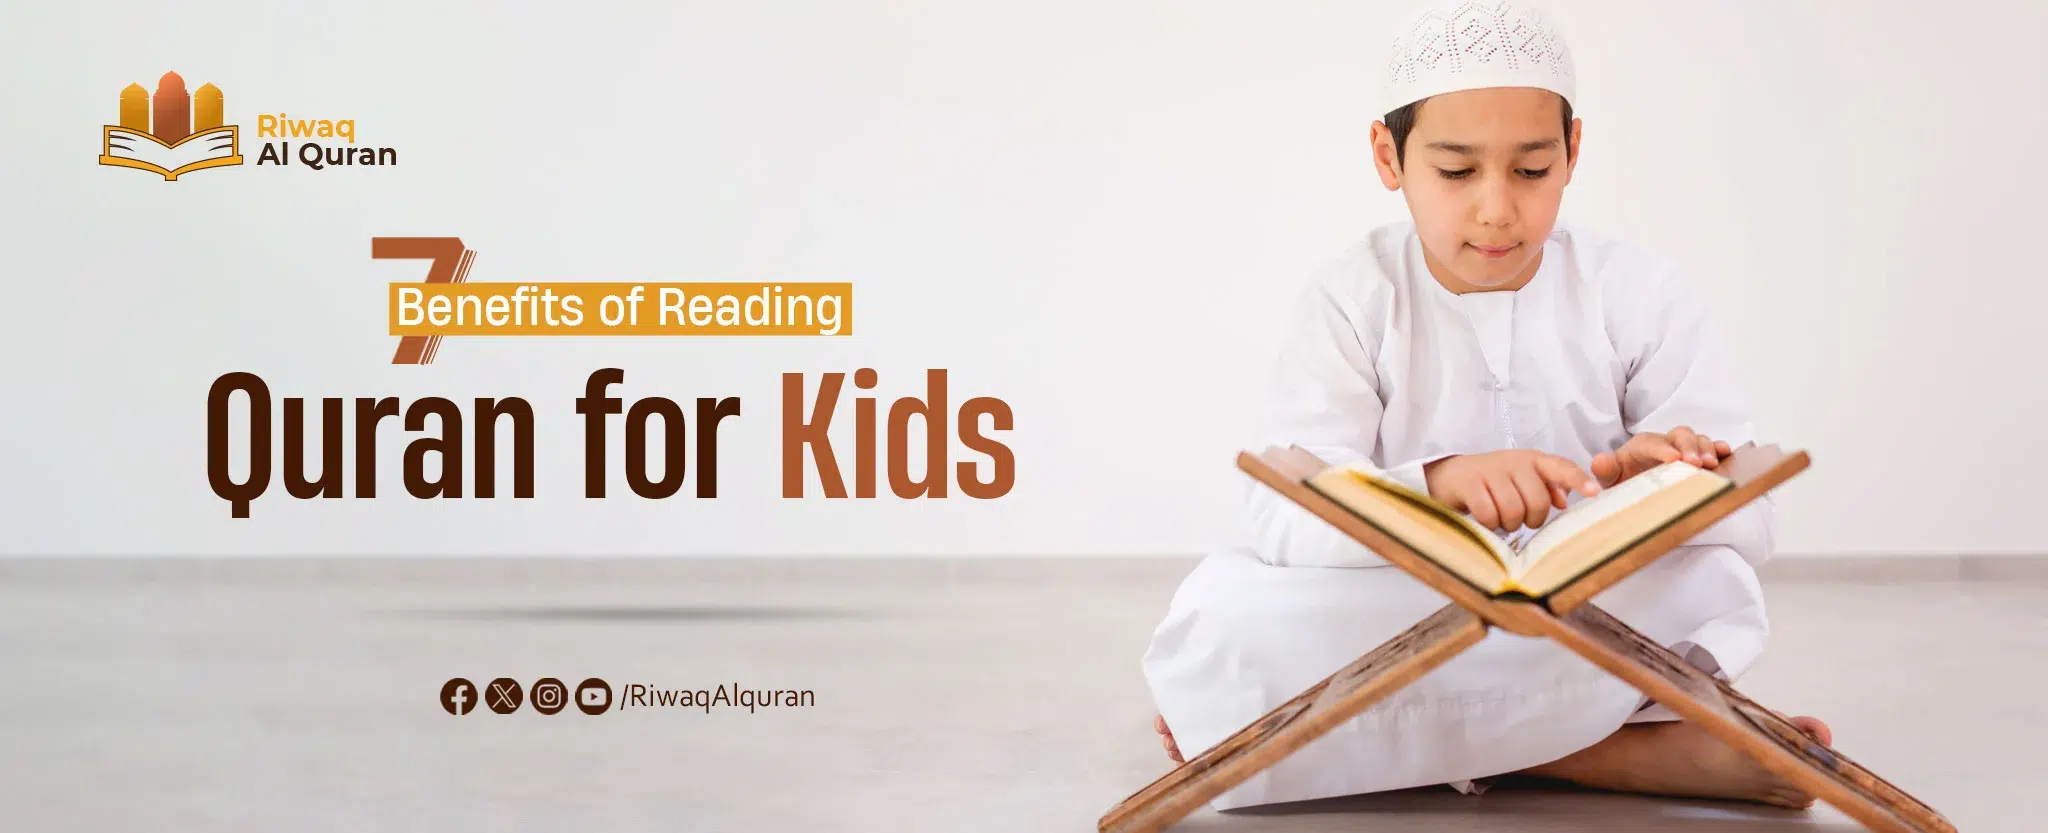 Benefits of Reading the Quran for Kids